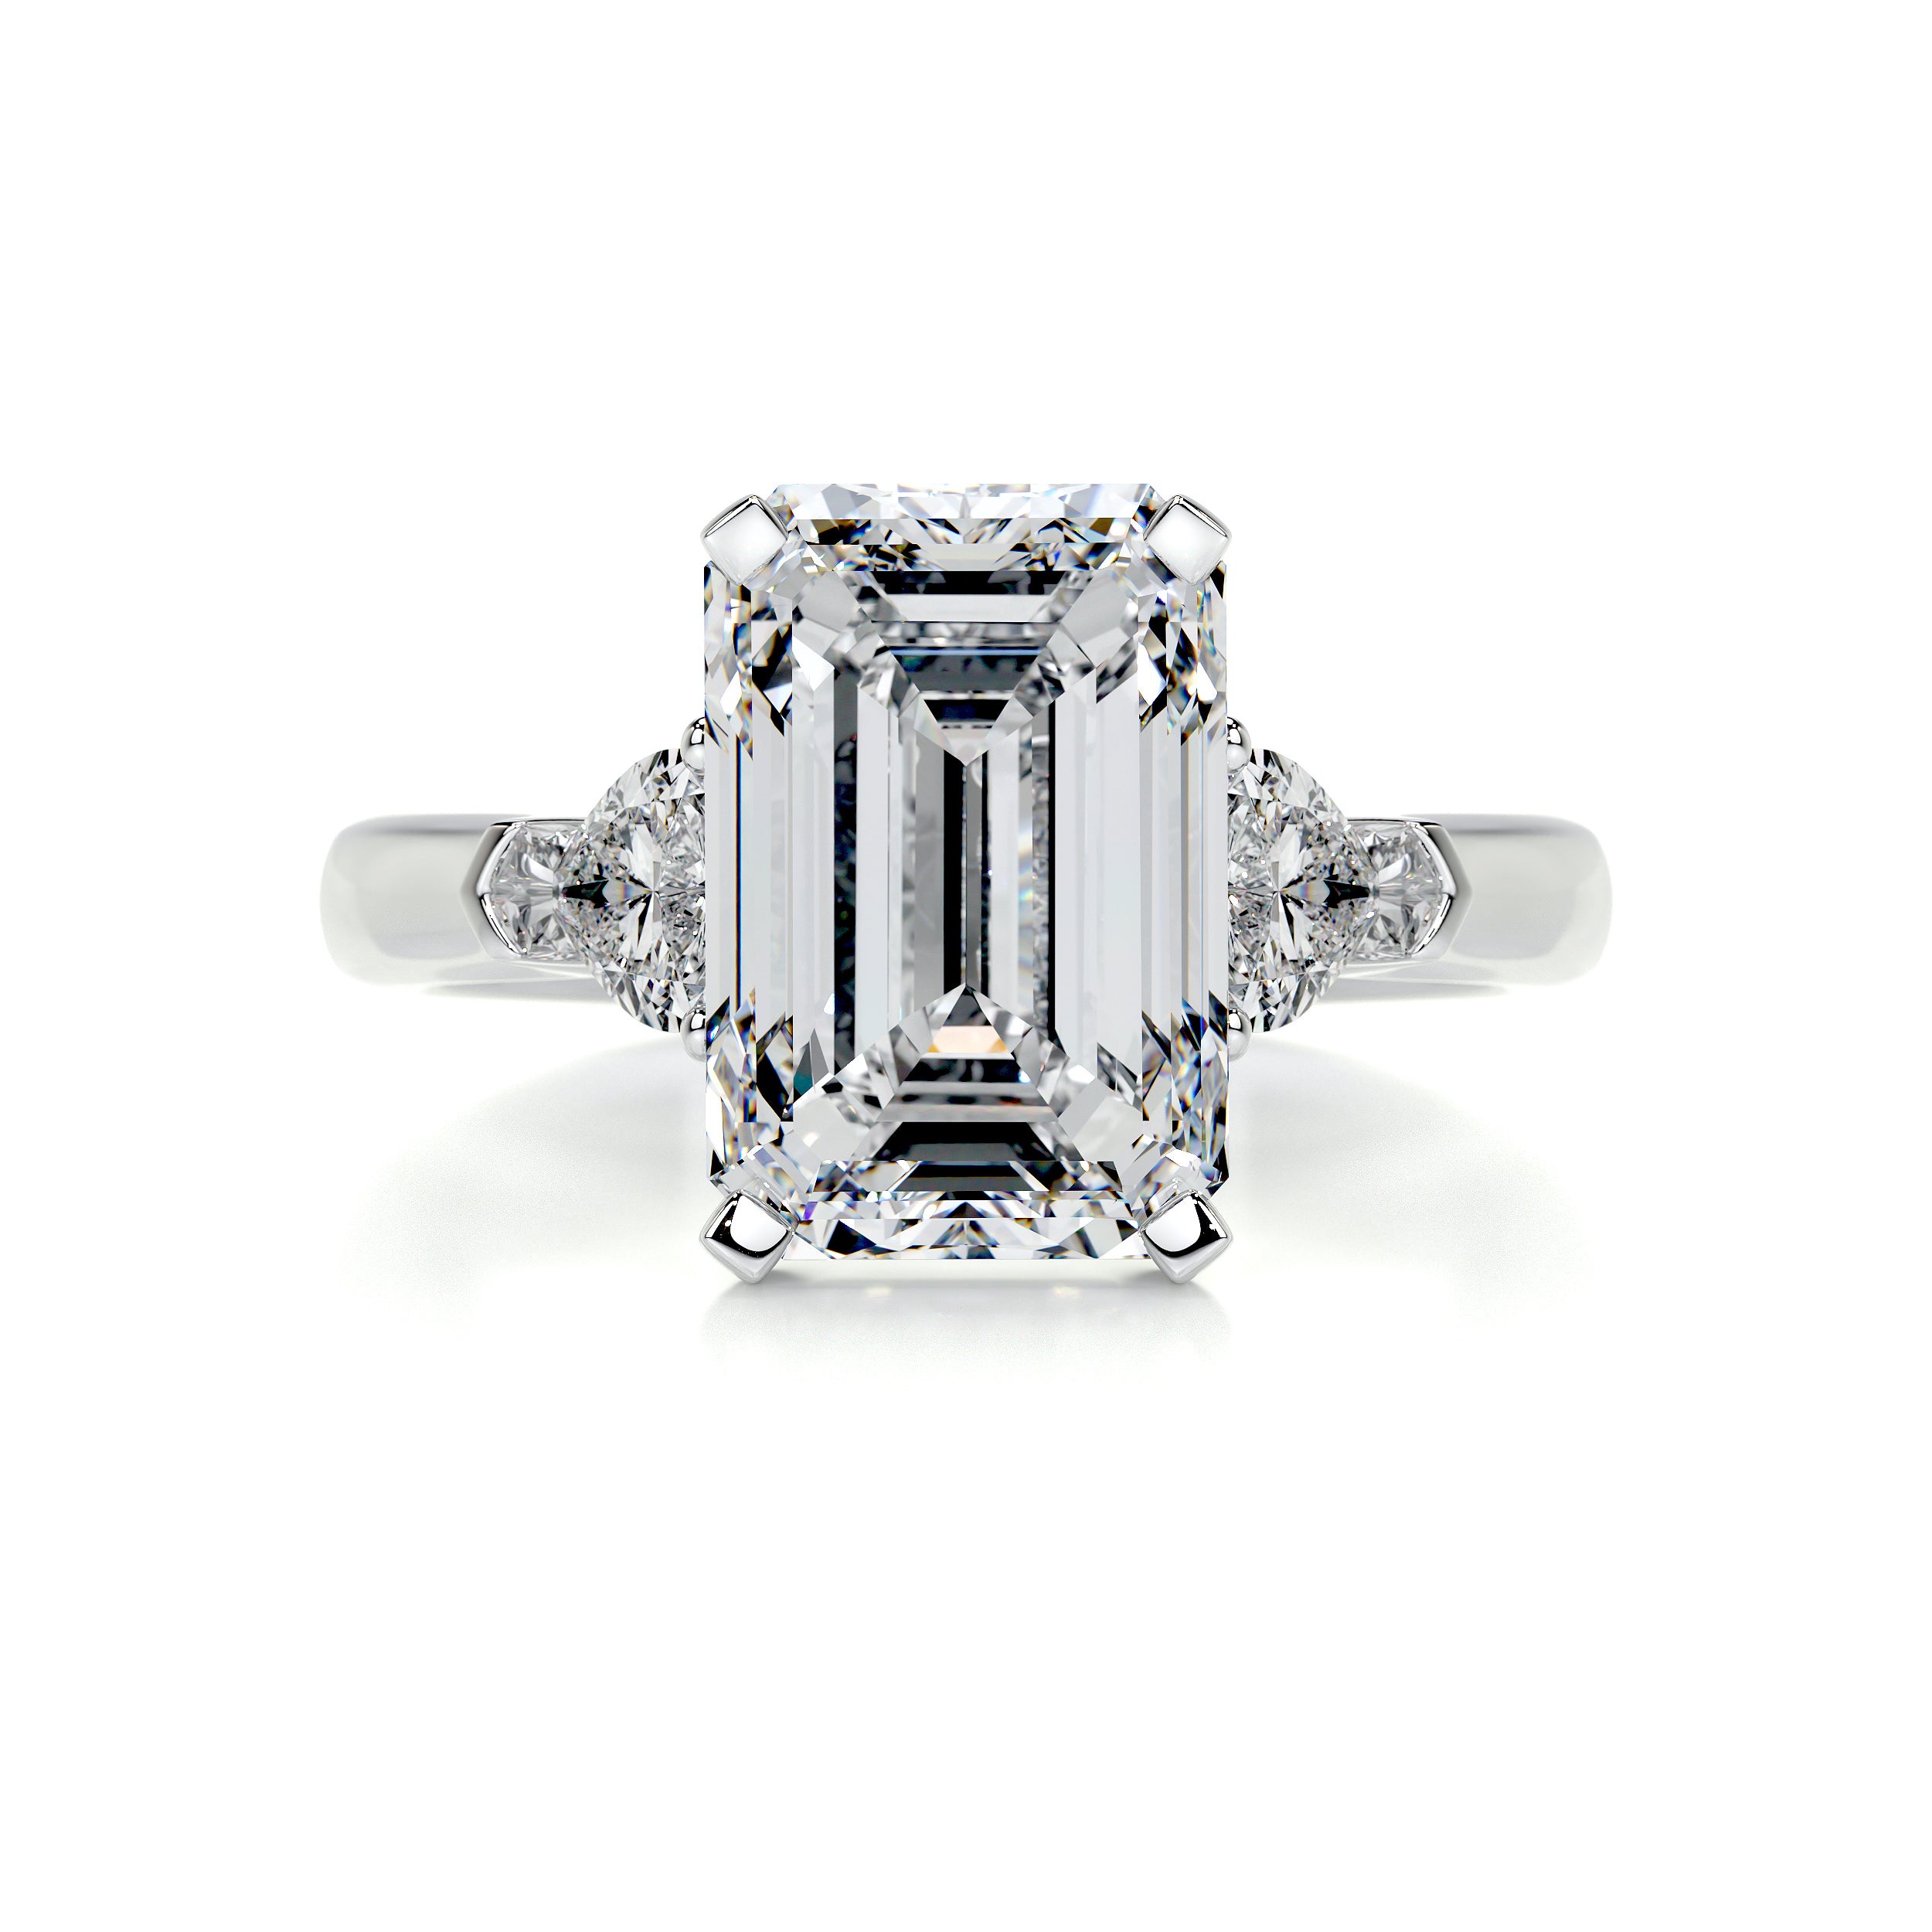 33 Emerald Cut Engagement Rings to Propose With - Emerald Cut Engagement  Rings